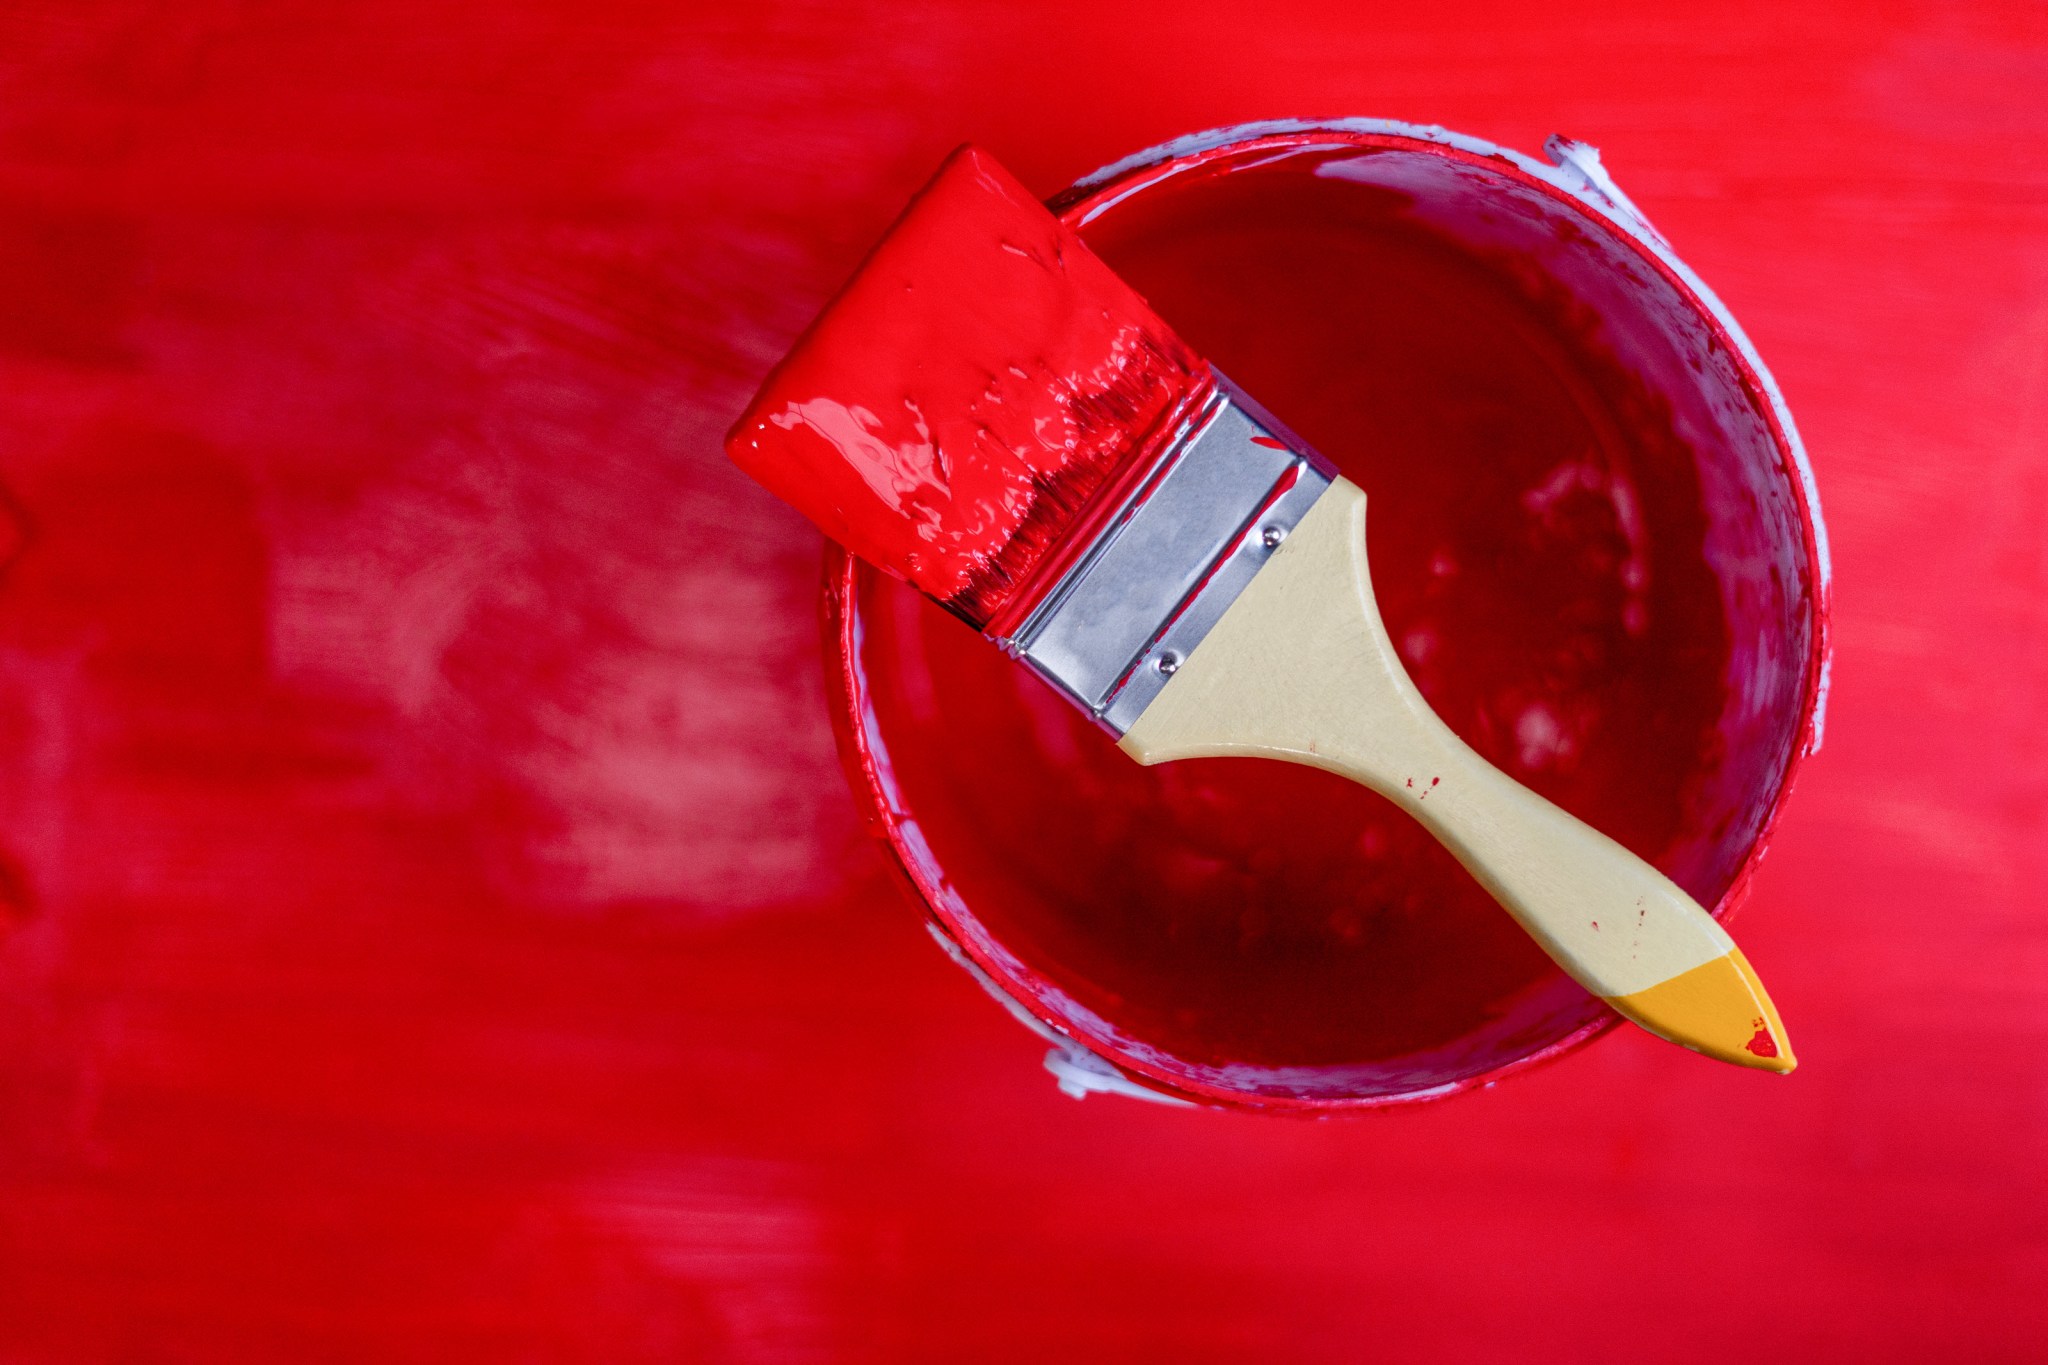 A paintbrush on a bucket filled with red paint.